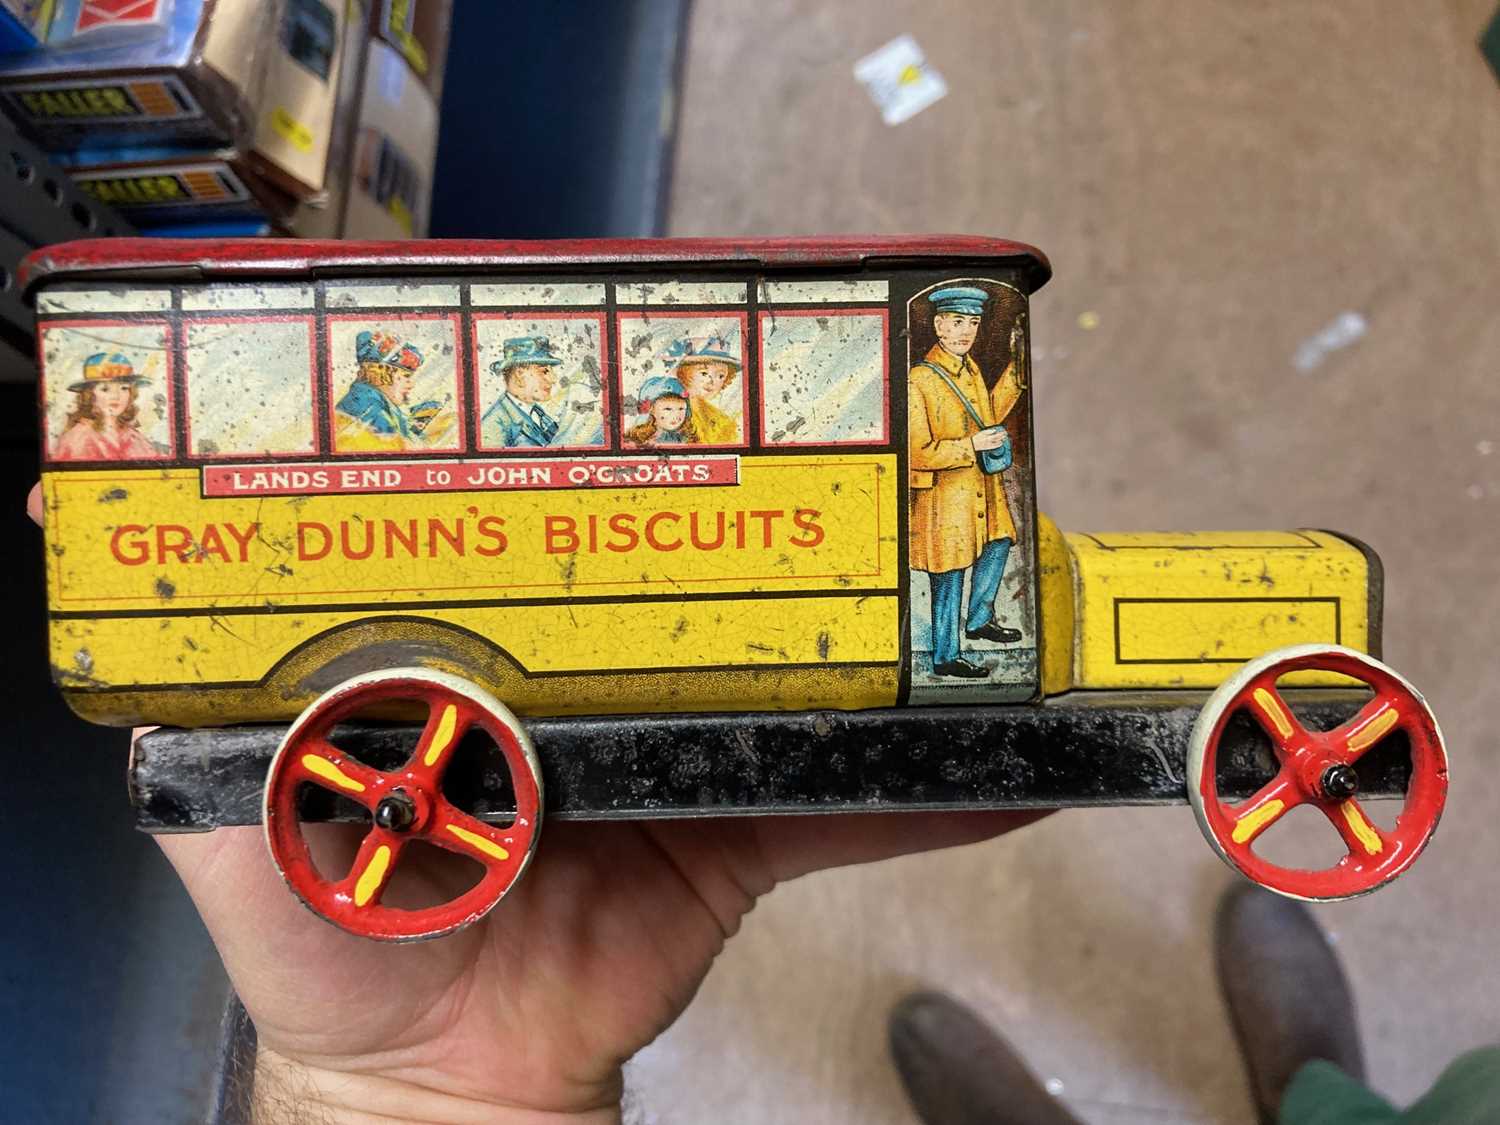 Tinplate biscuit tin tram and Gray Dunn’s biscuits bus, some rusting, paint damage fair and a - Image 2 of 6